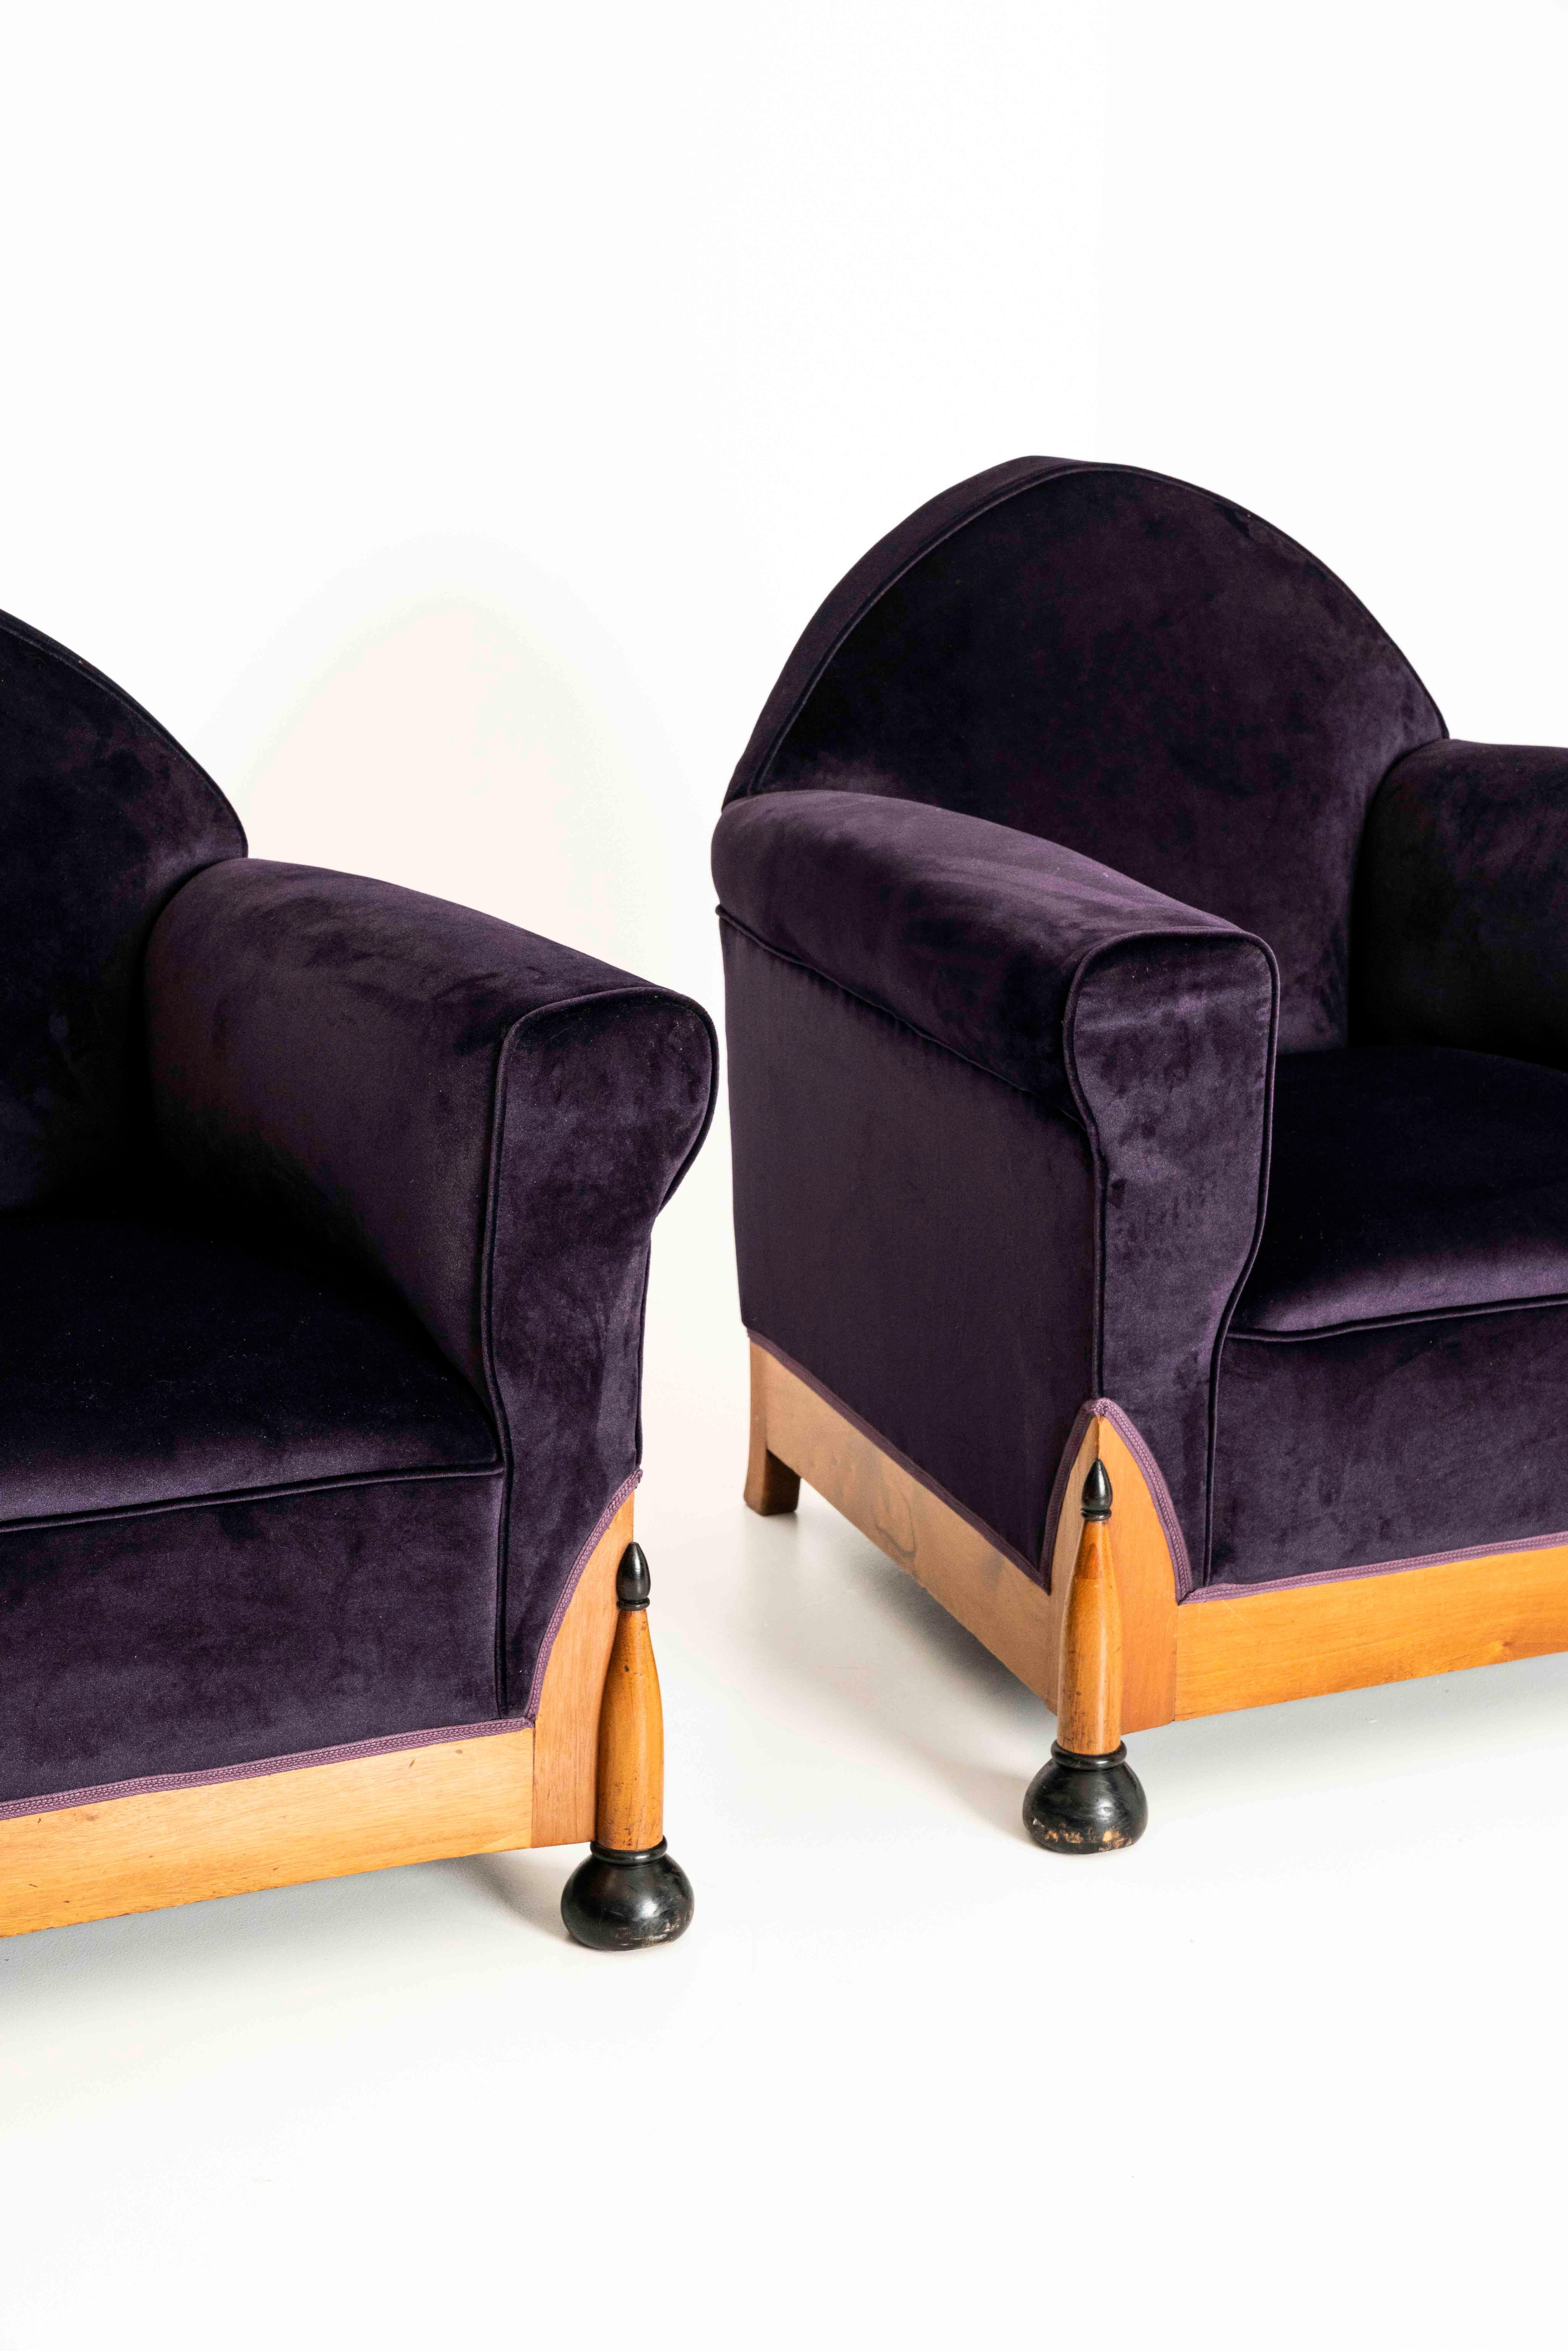 Fabric Two Amsterdam School Lounge Chairs in Purple Velvet, The Netherlands 1930s